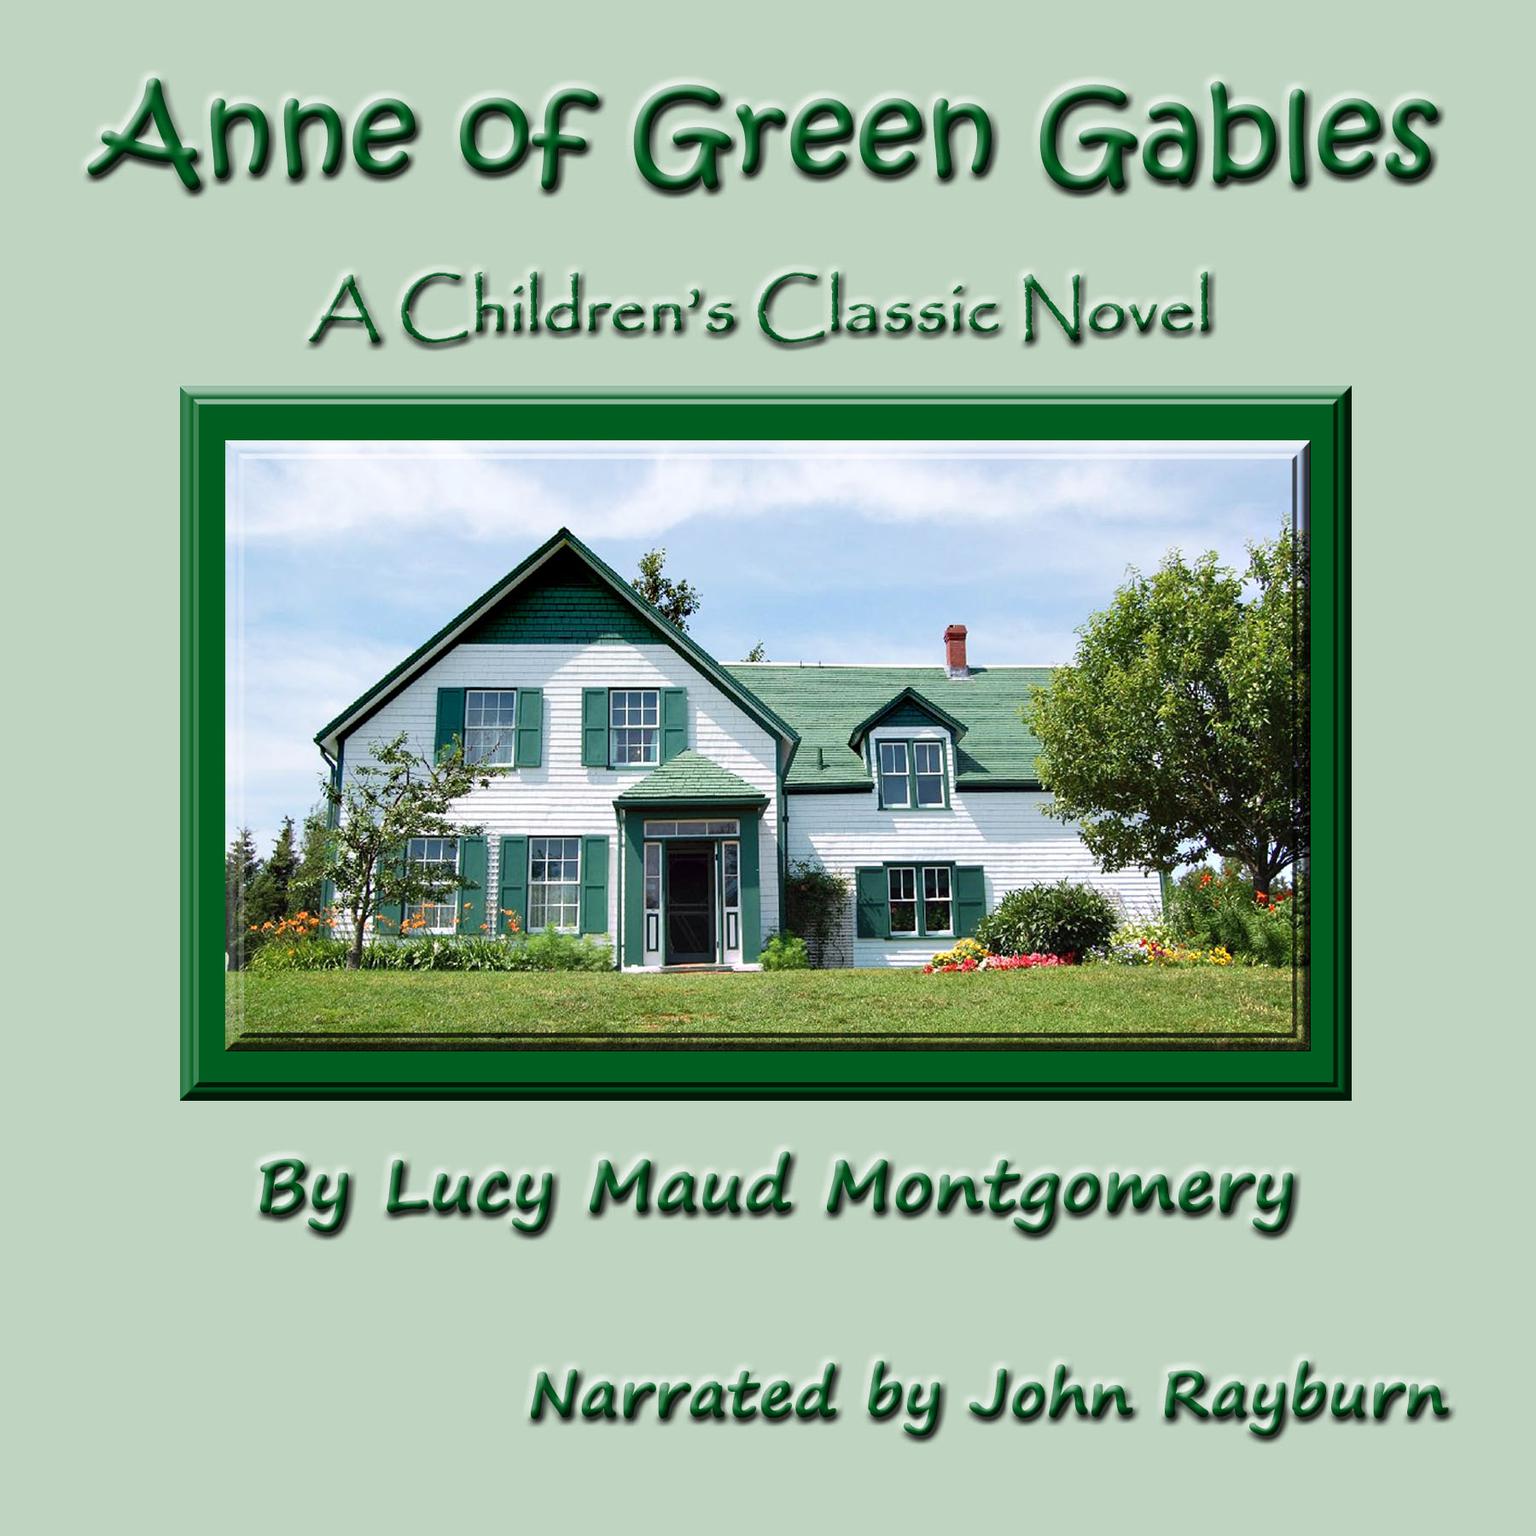 Anne of Green Gables: A Children’s Classic Novel Audiobook, by L. M. Montgomery